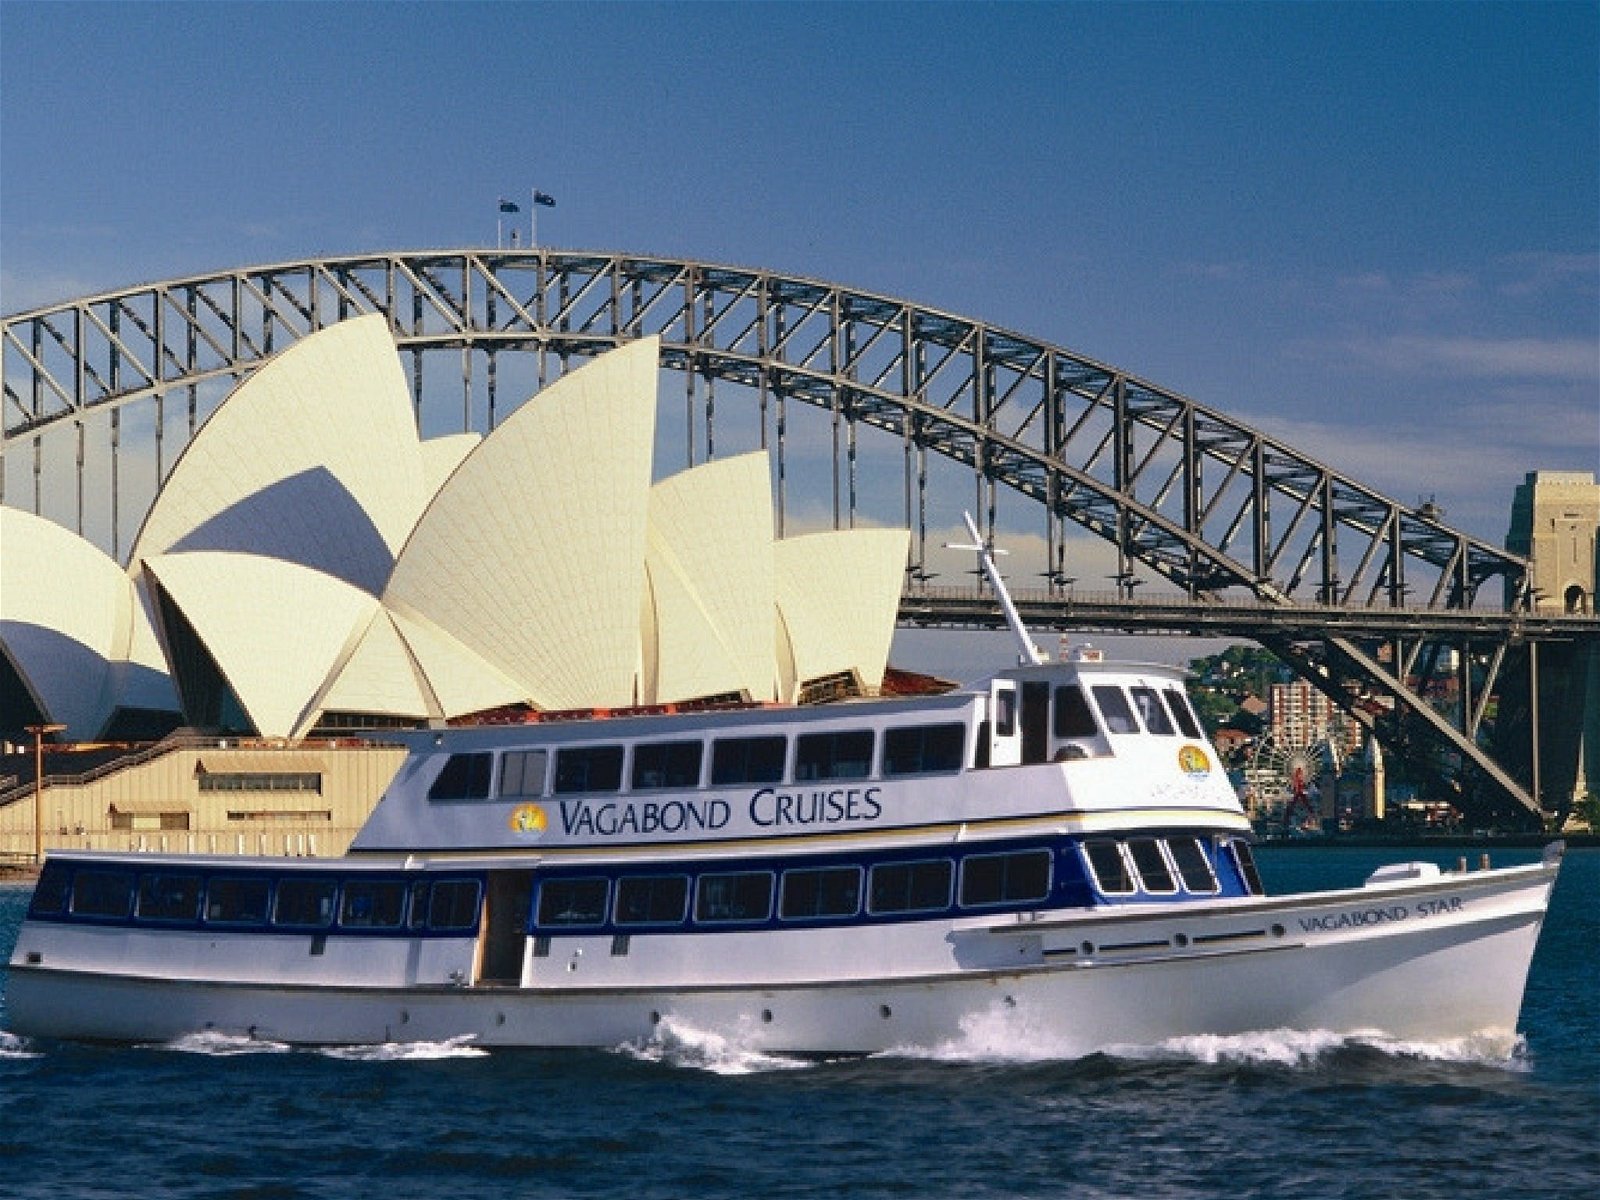 NRL Grand Final Transfer with Vagabond Cruises Darling Harbour